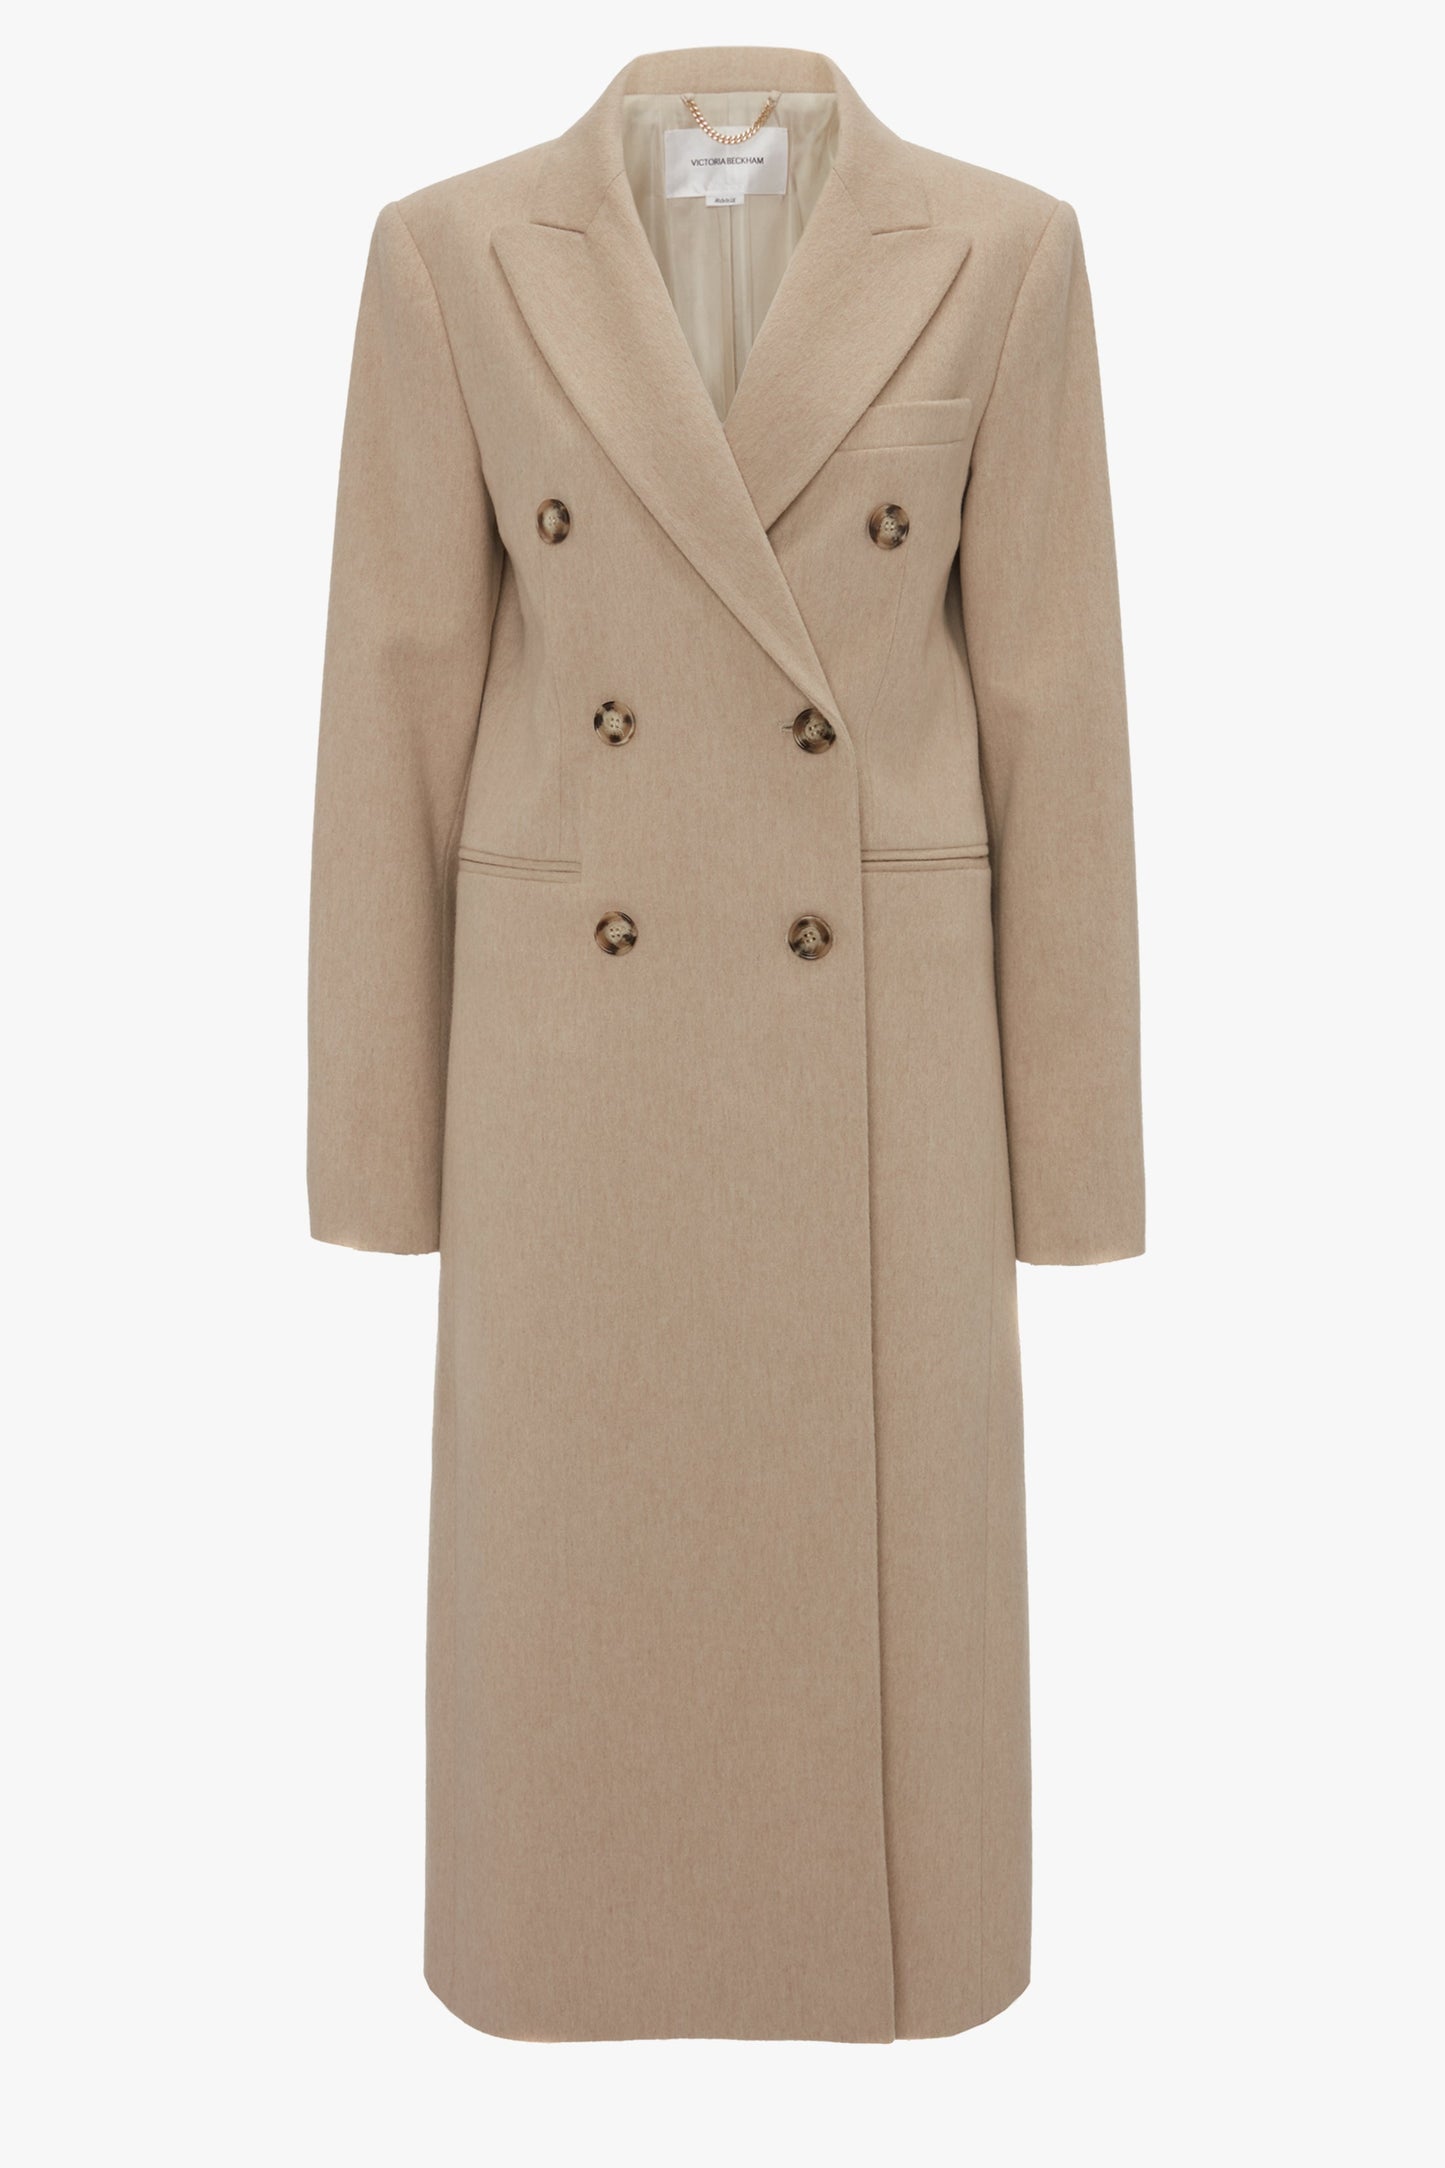 Beige wool-cashmere blend double-breasted overcoat with wide lapels and six buttons, displayed on a white background from Victoria Beckham.